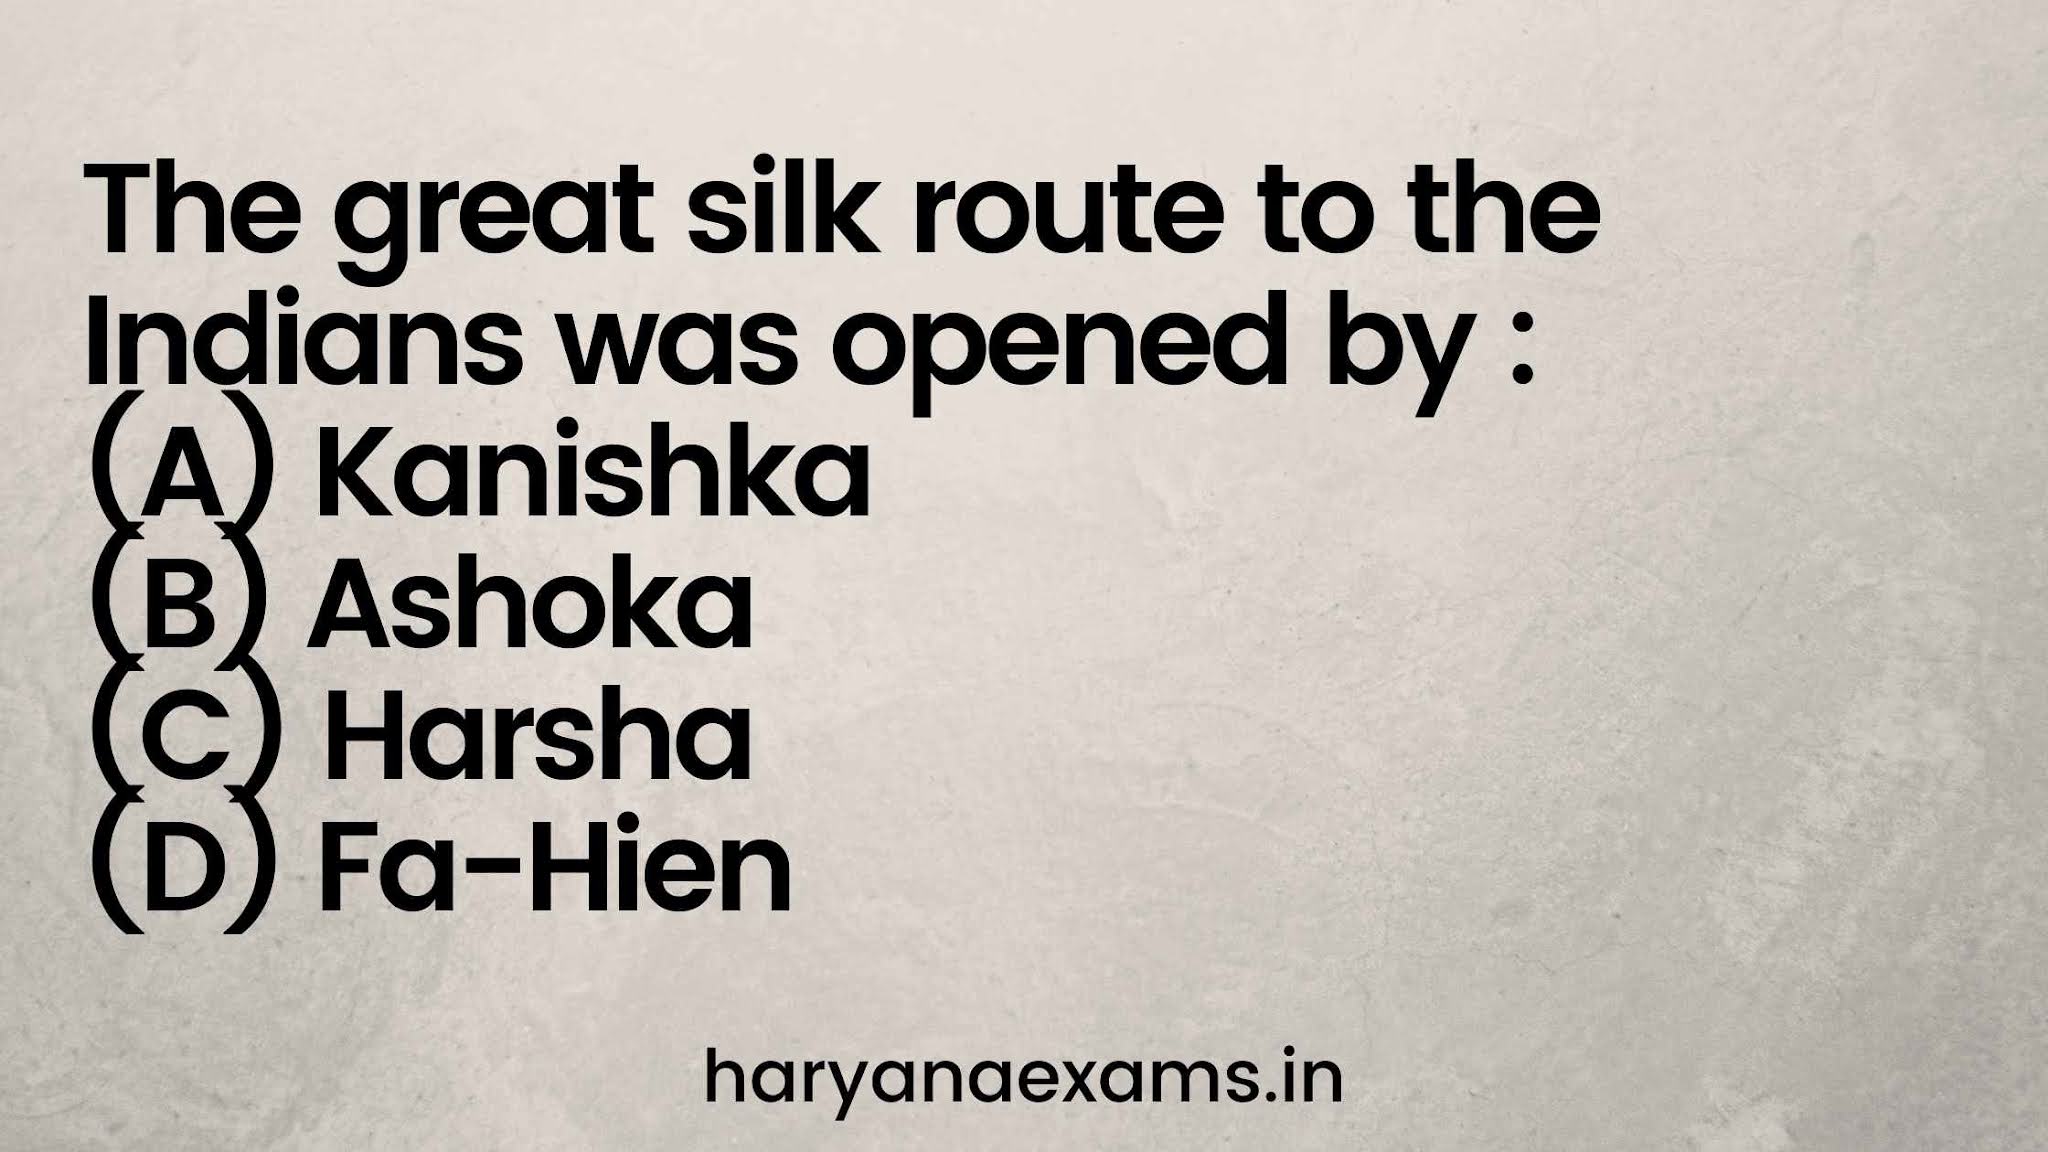 The great silk route to the Indians was opened by :  (A) Kanishka  (B) Ashoka  (C) Harsha  (D) Fa-Hien